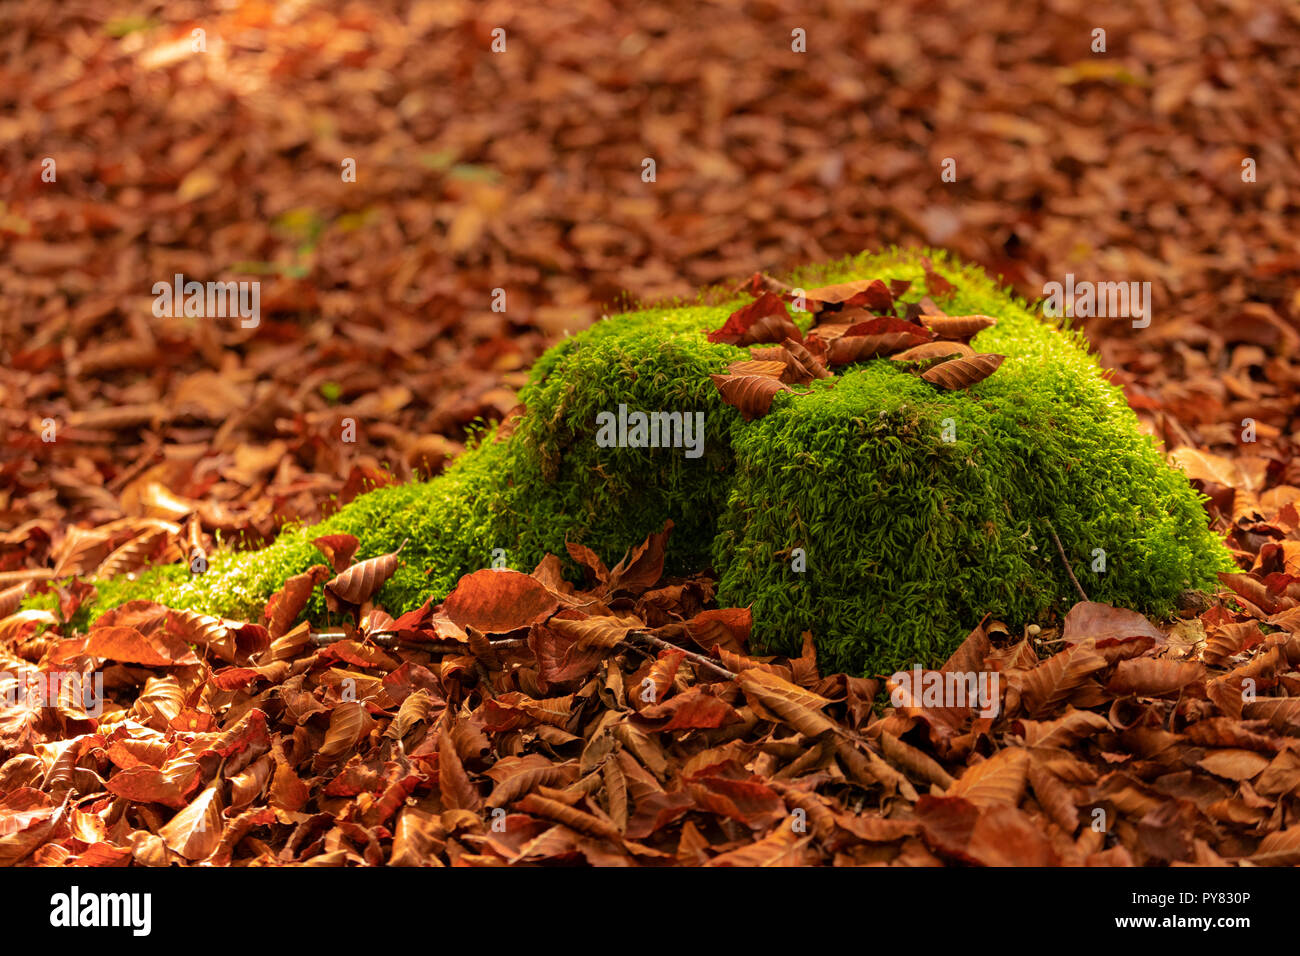 Fallen leaves over green moss in autumn forest Stock Photo